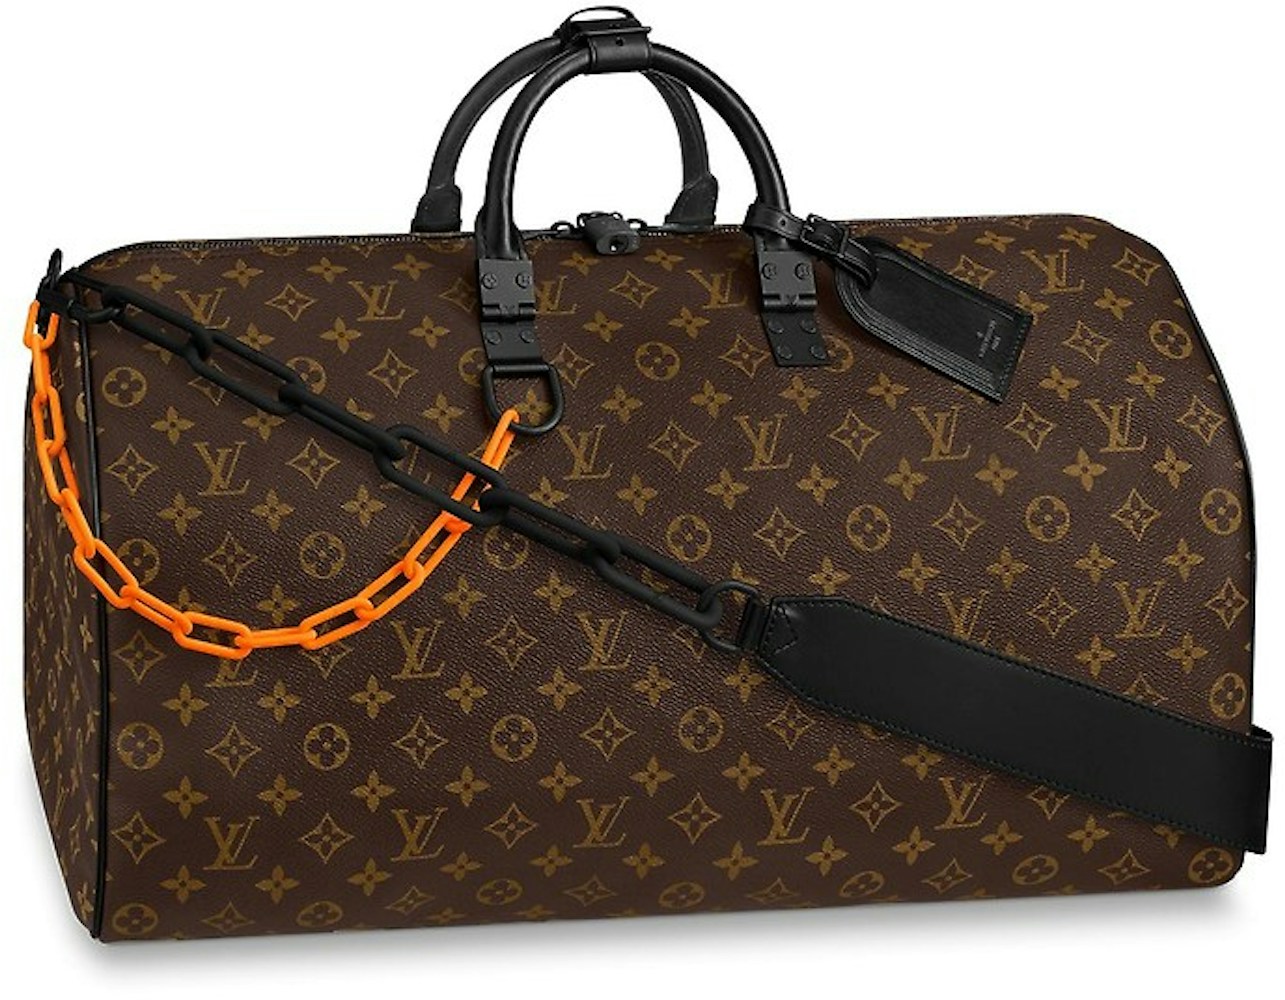 Konsekvenser tackle Akvarium Louis Vuitton Keepall Bandouliere Black-tone 50 Brown in Coated Canvas with  Orange/Black-tone